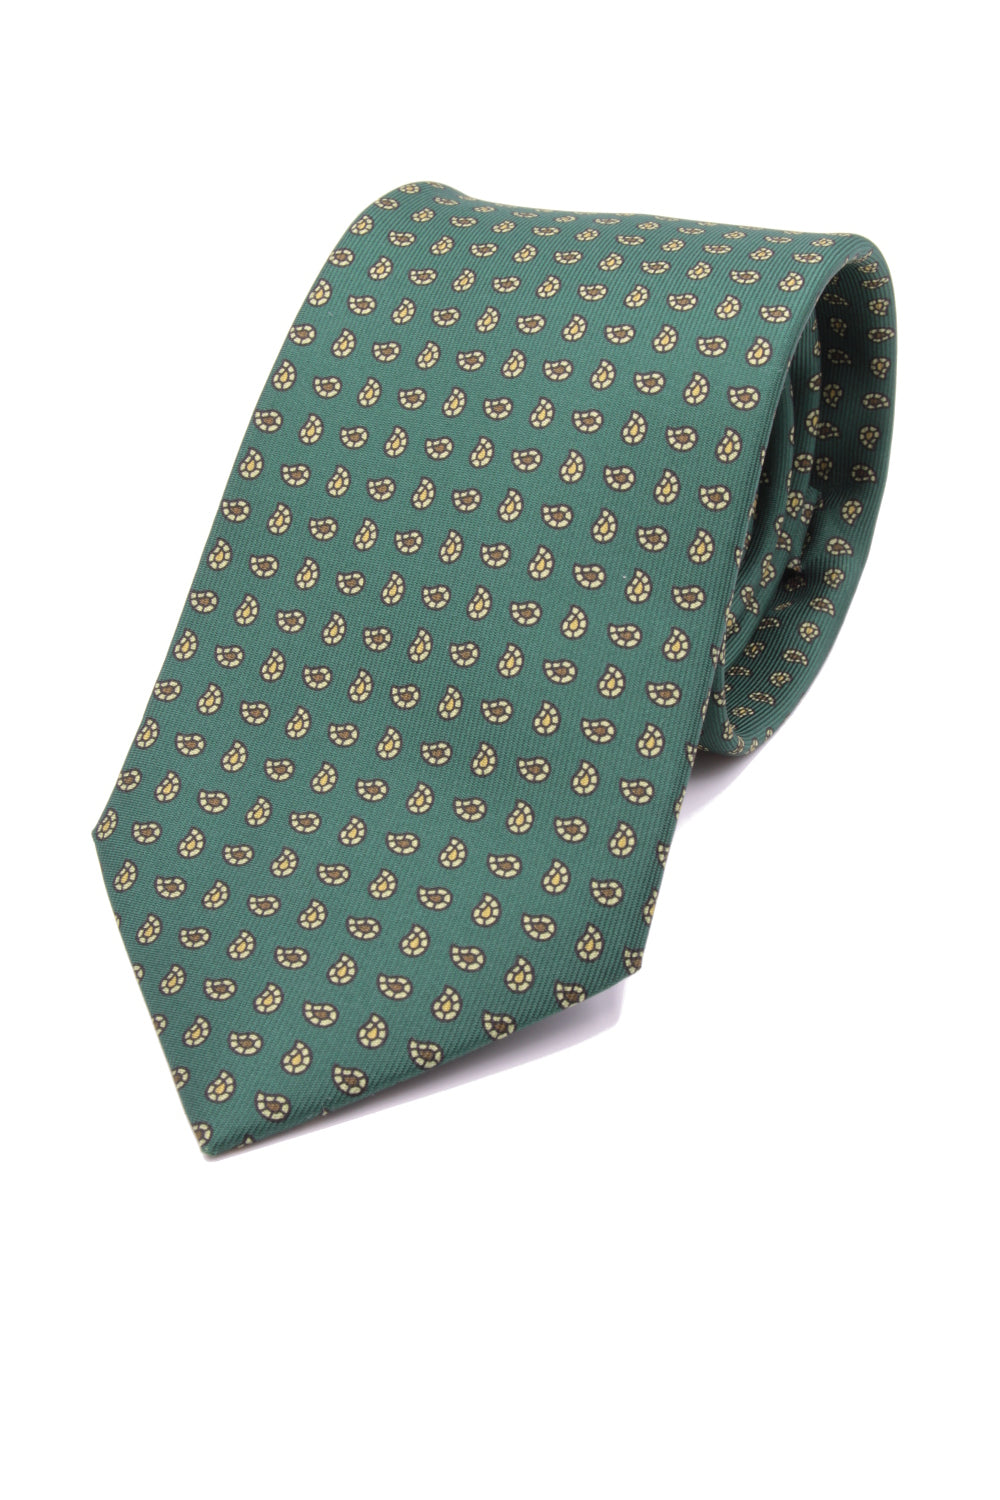 drake's Green, light yellow and brown print tie